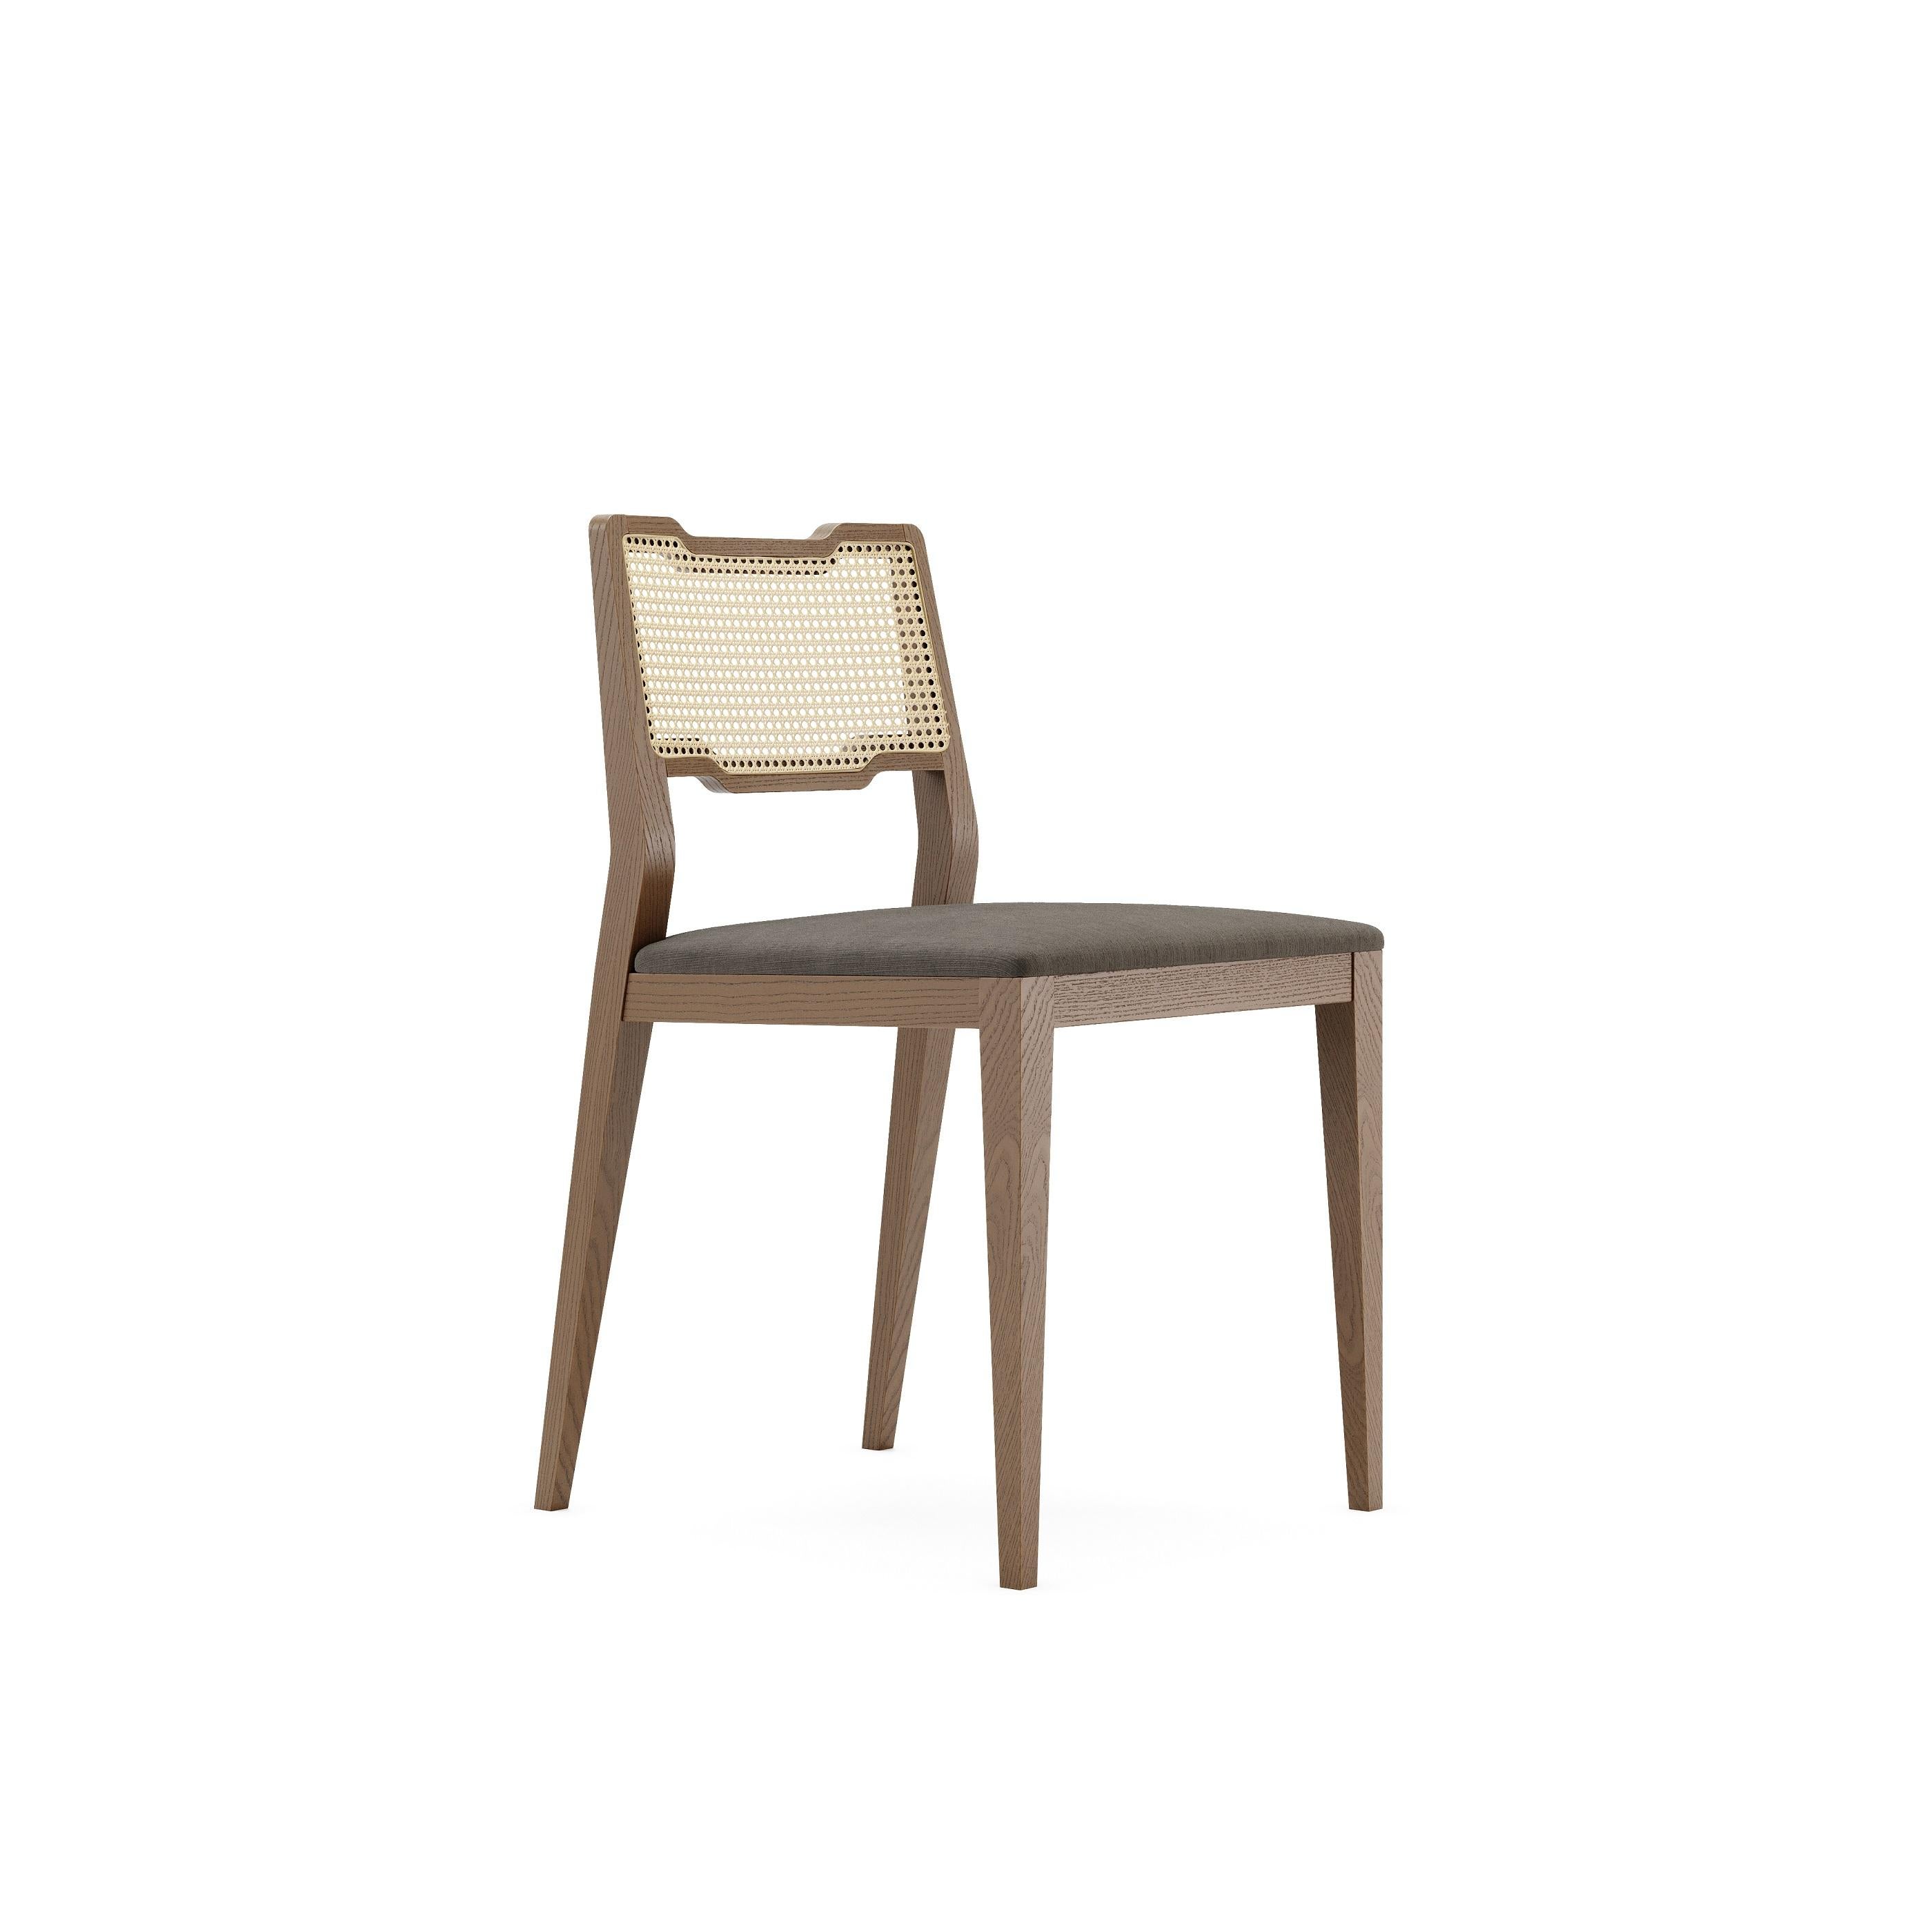 Artisan assembled from matte walnut and woven work, the chair also benefits from a comfortably cushioned seating pad and back support, ensuring an unforgettable experience.
Measurements:
460 x 530 x 810
Finishes
Fabrics – Cotton velvet